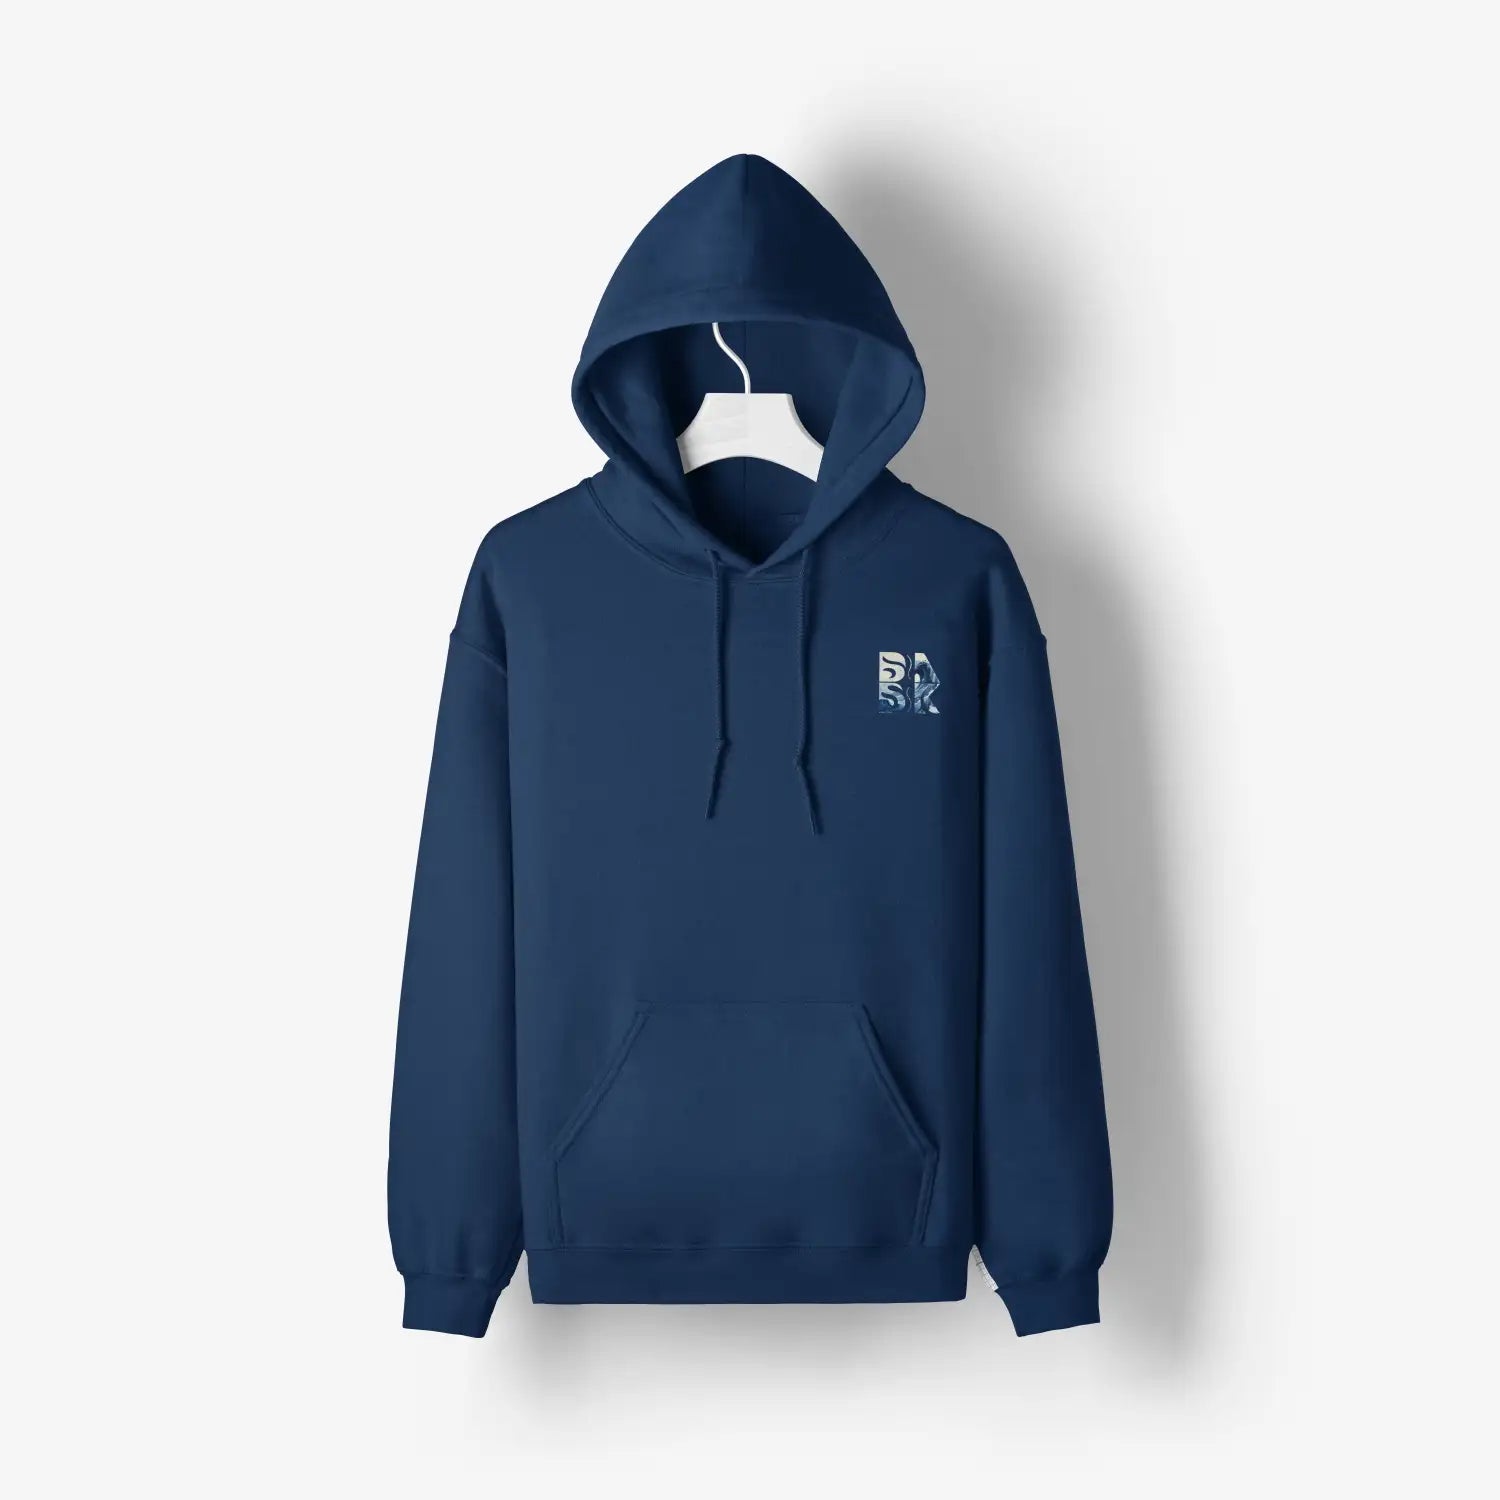 A blue Peace Be Still Hoodie with the Be Still and Know logo.